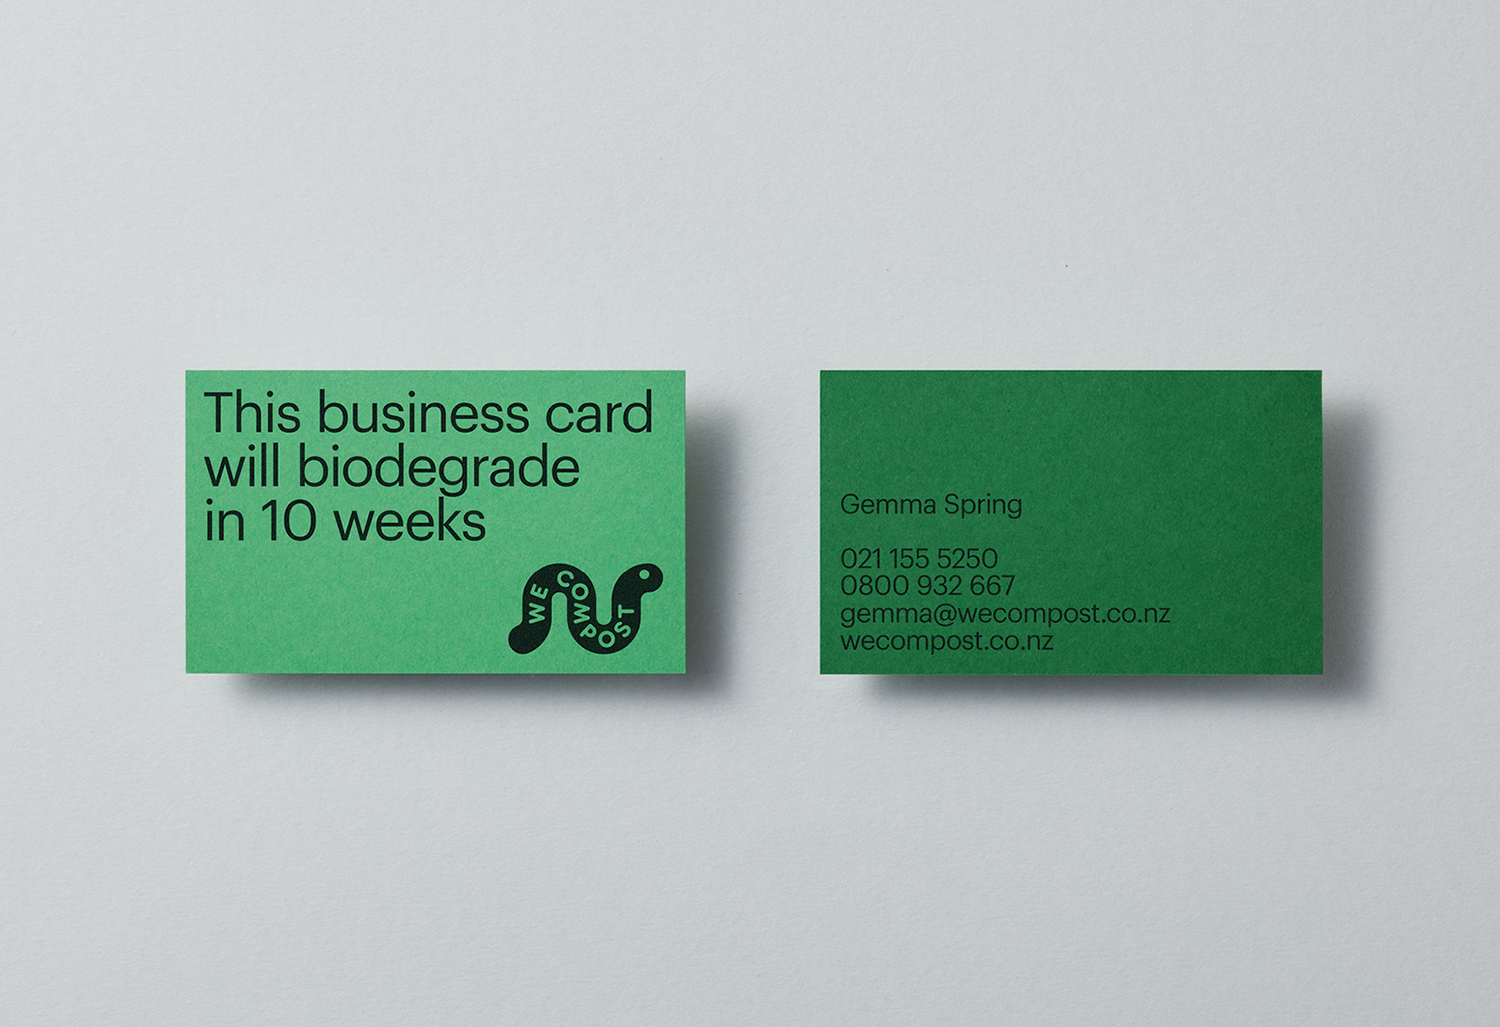 Creative Business Cards – We Compost by Seachange